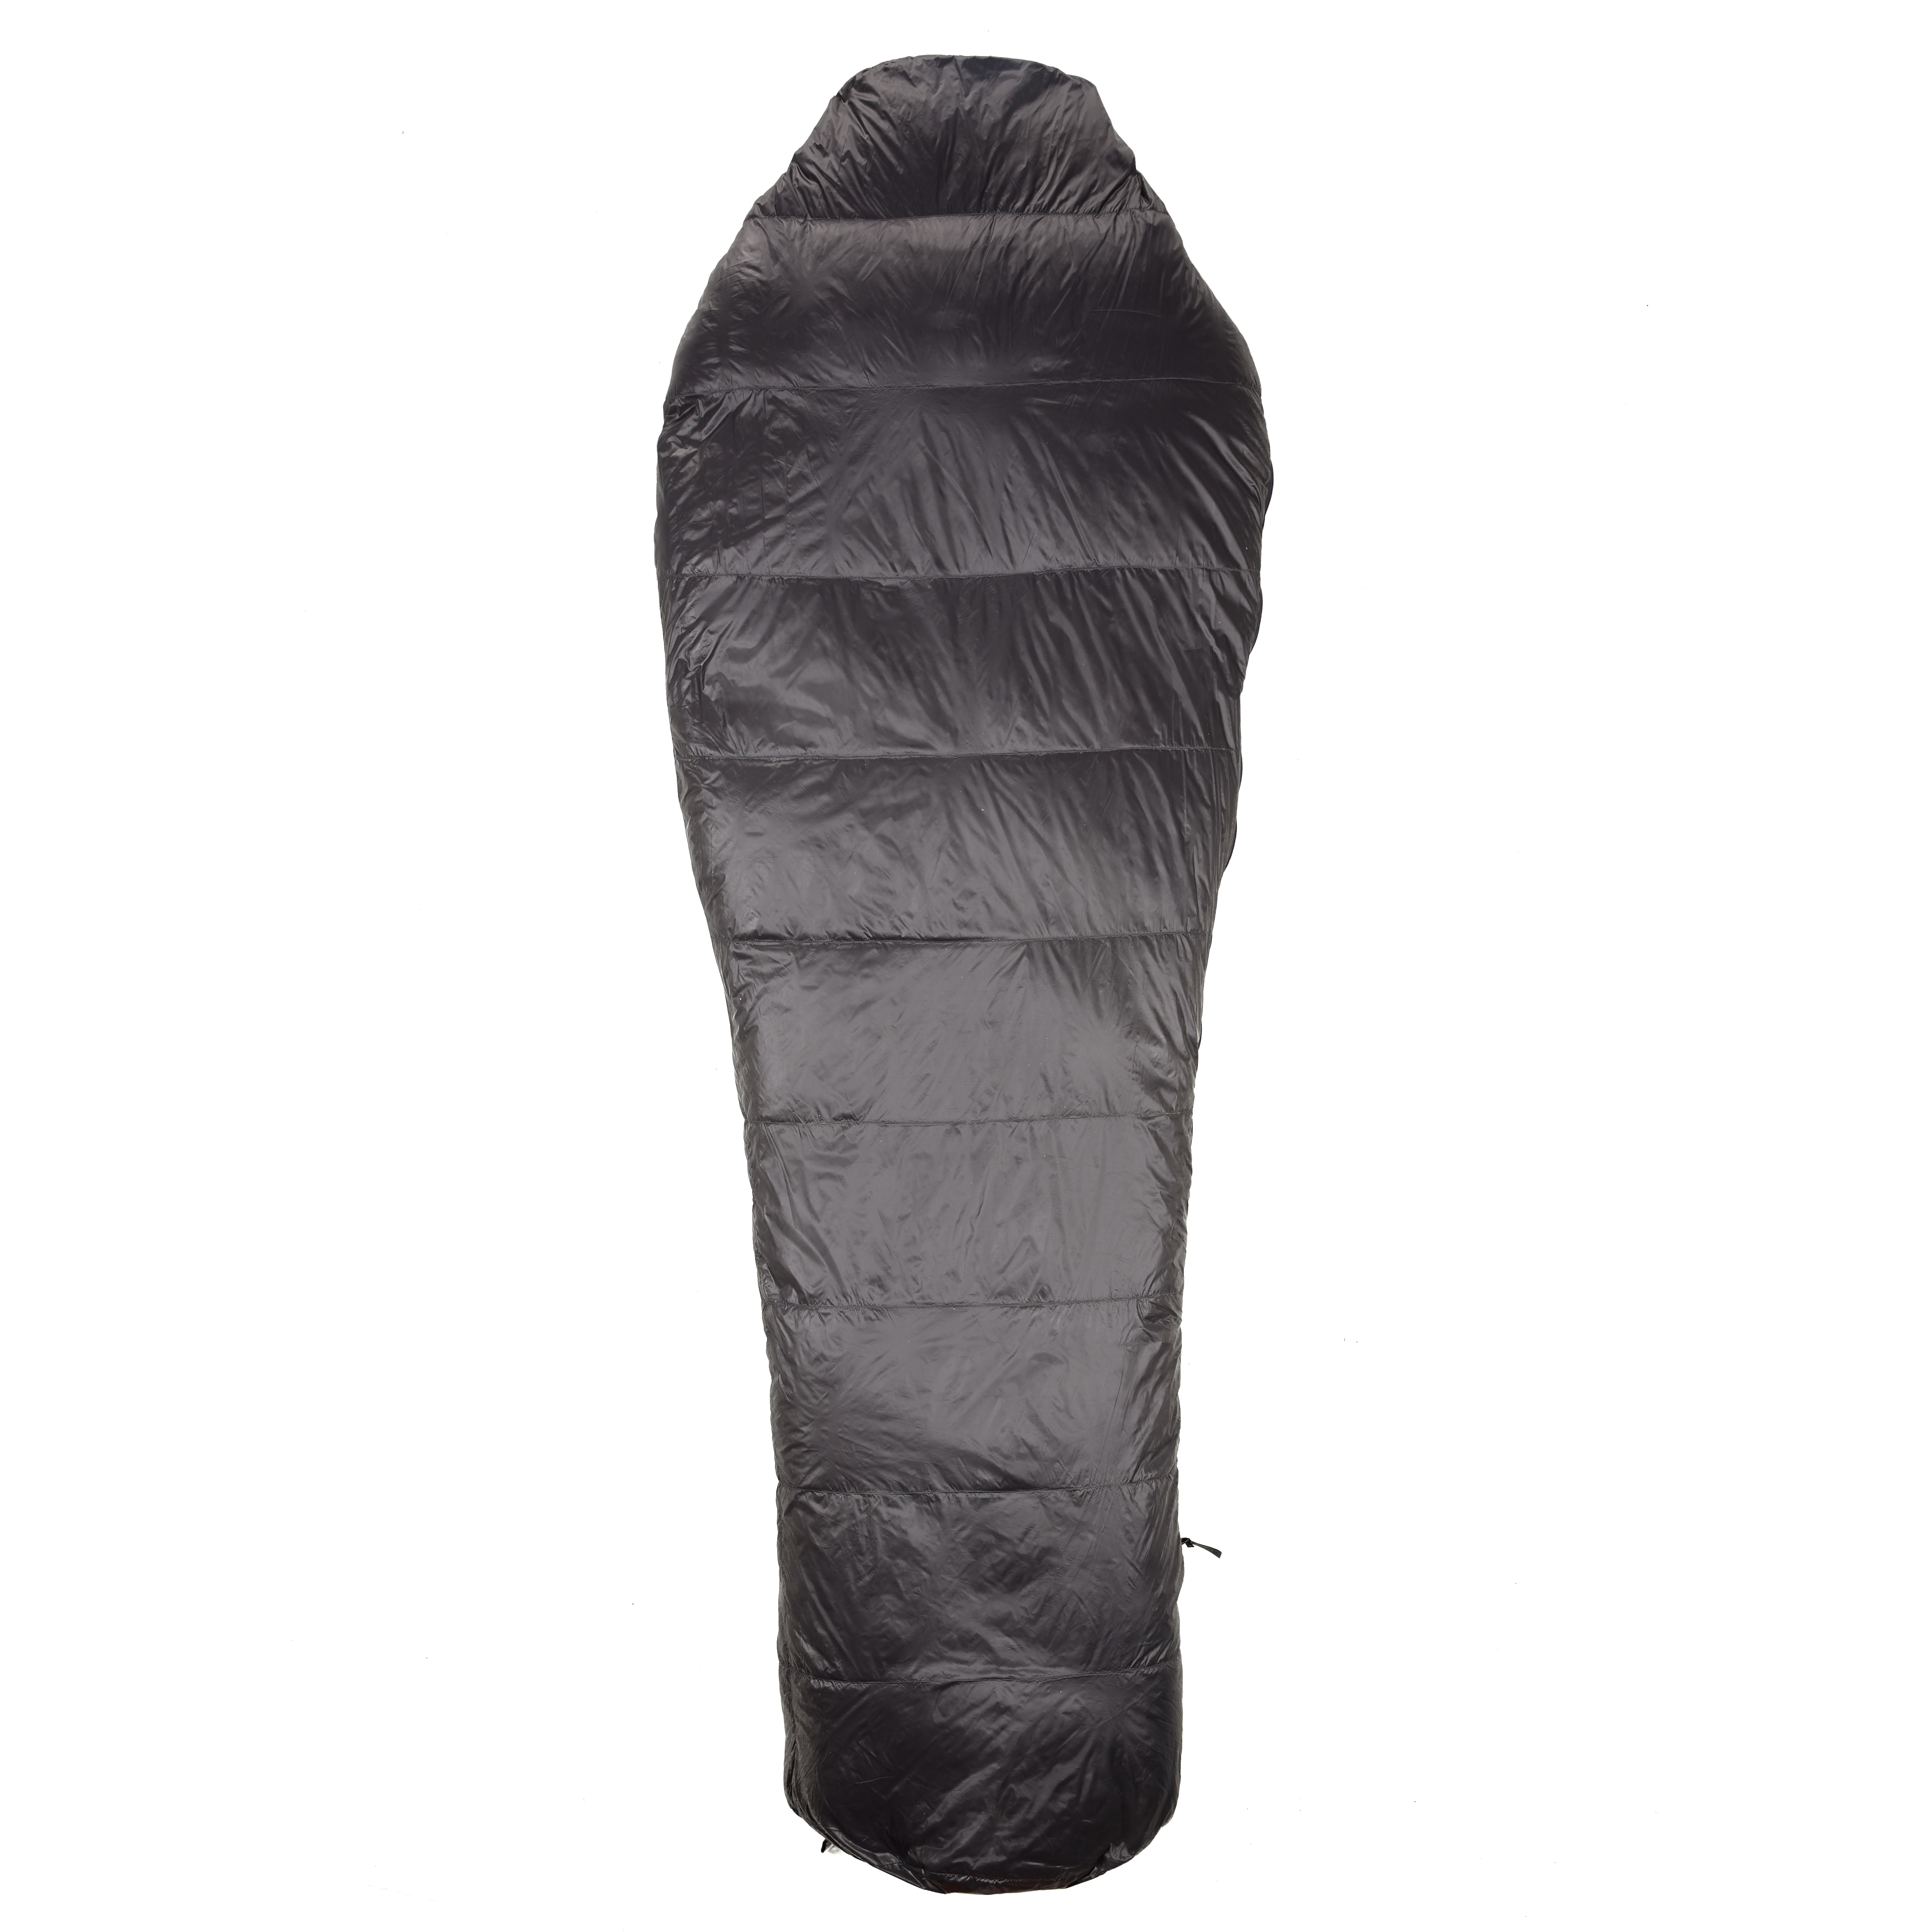 LITHIC 35-Degree Down Sleeping Bag - image 5 of 8